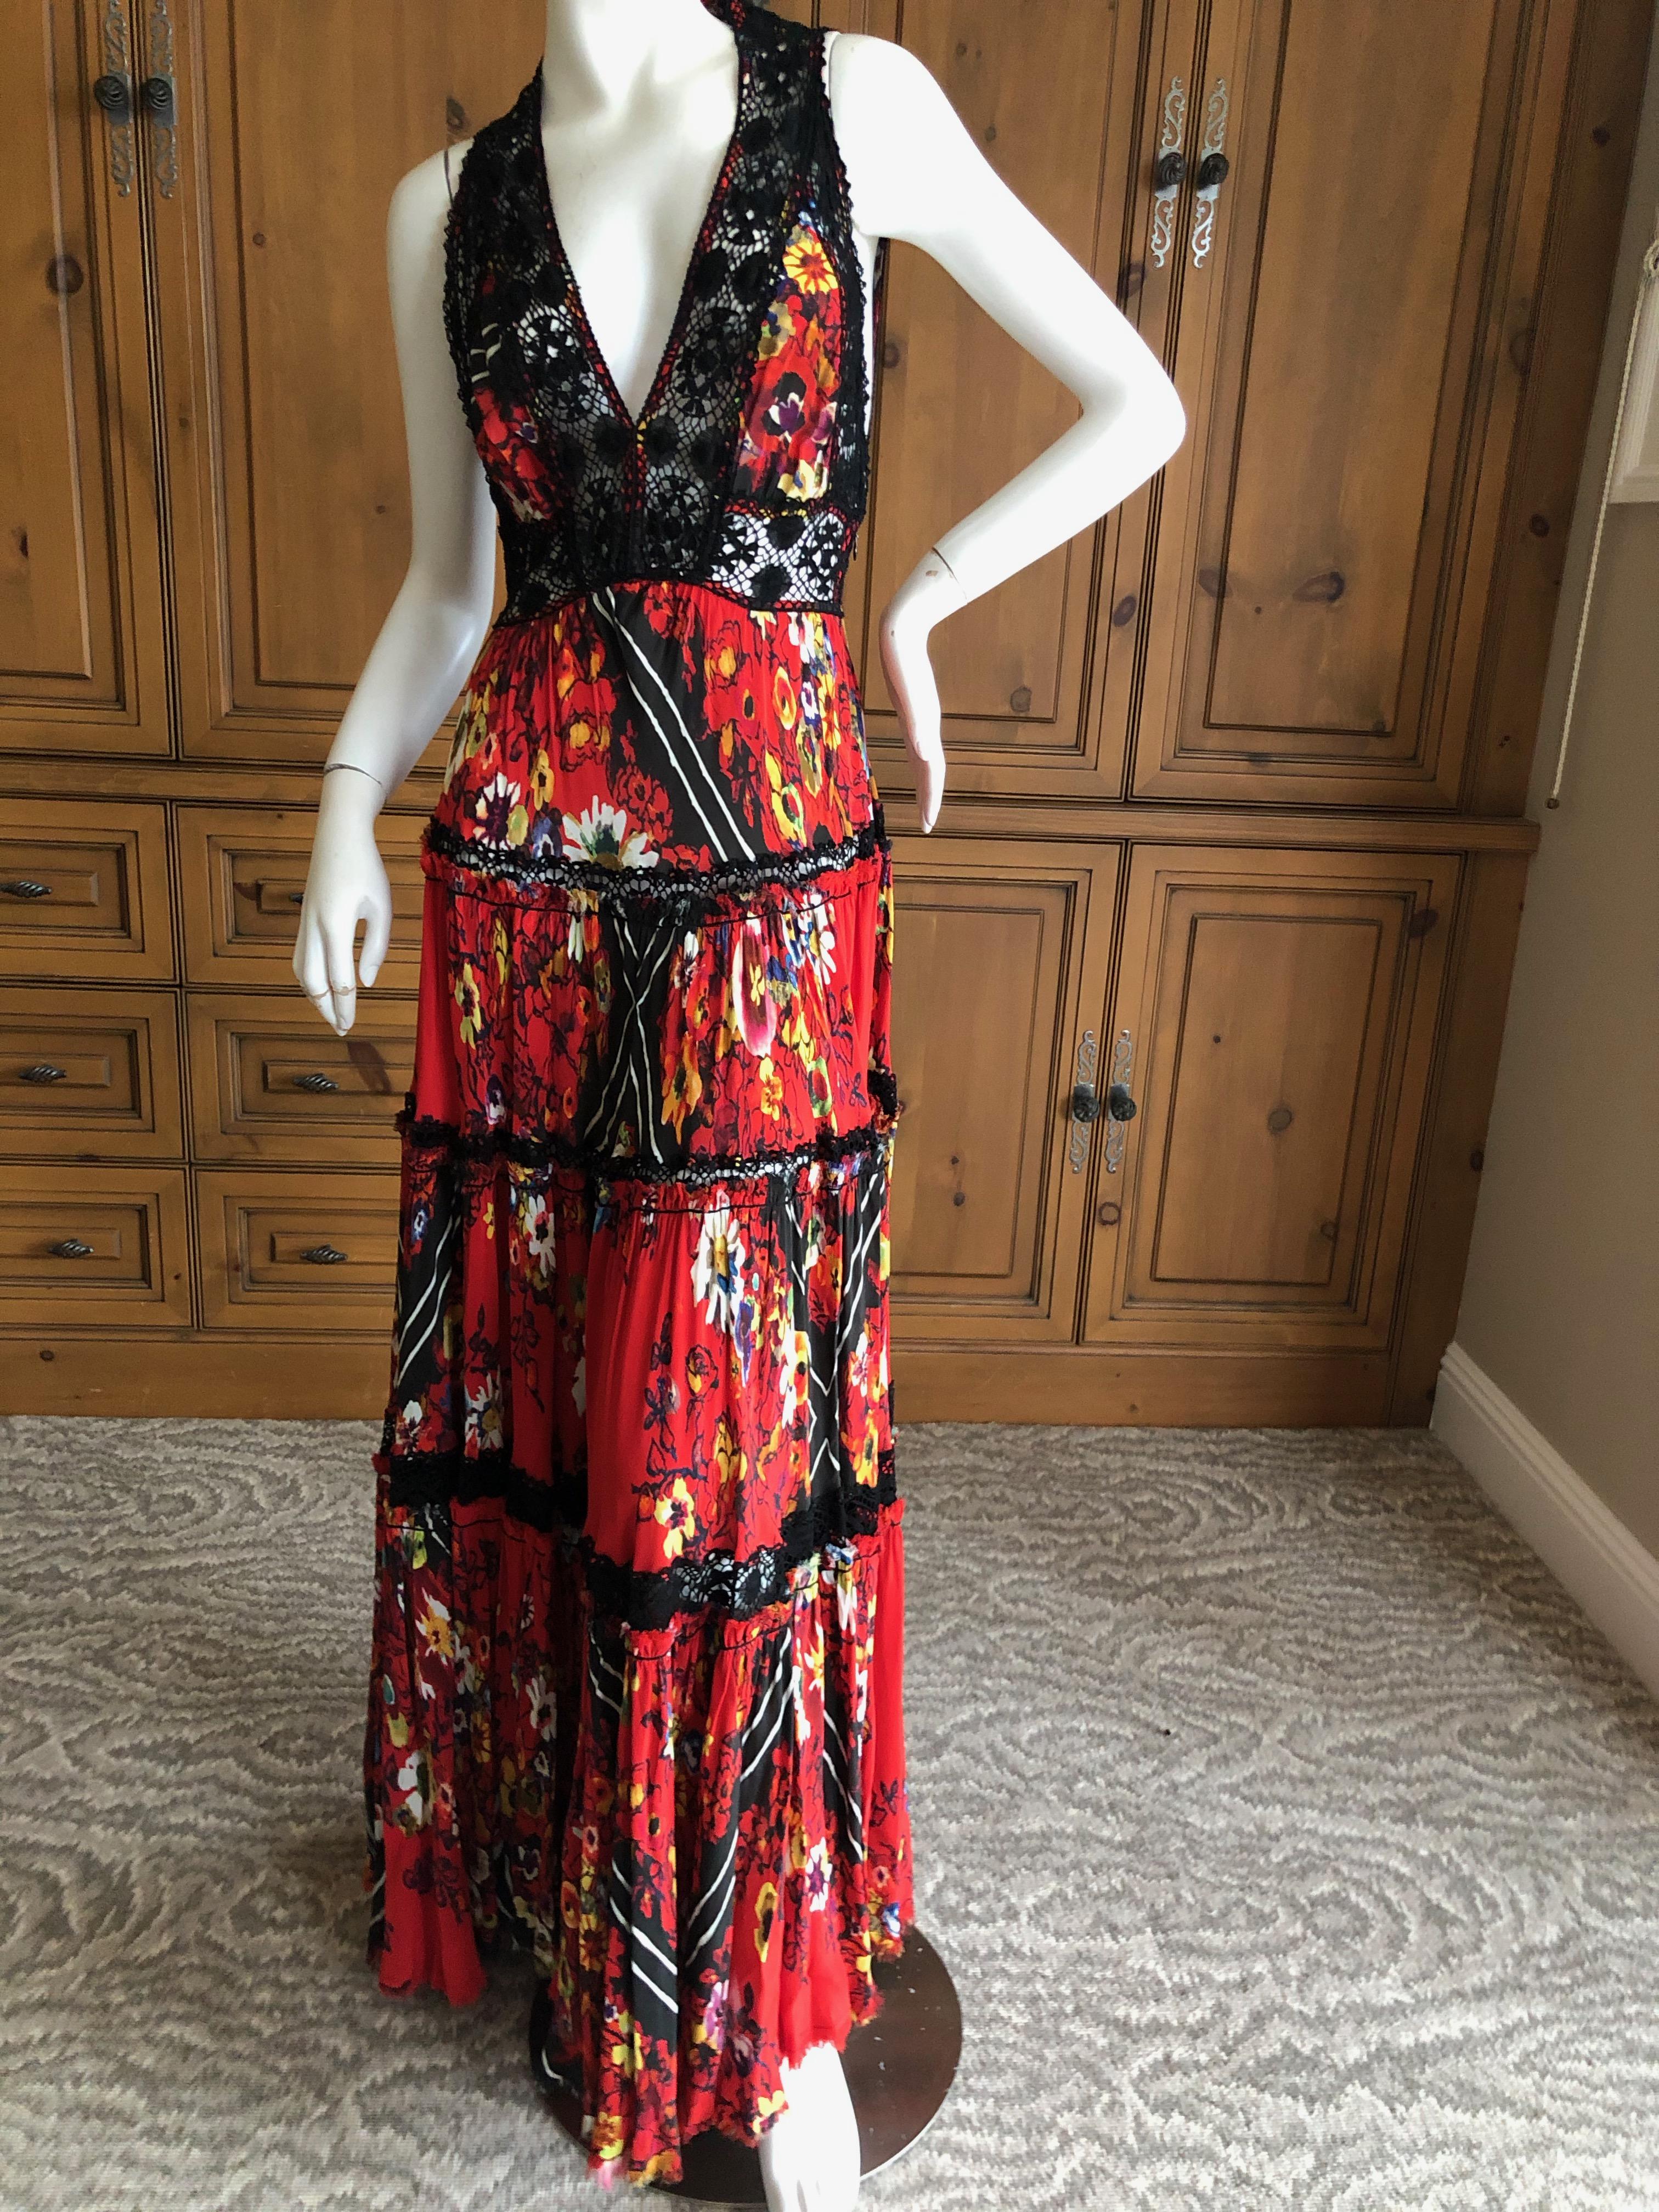 Jean Paul Gaultier Femme Vintage Low Cut Lace Gypsy Dress with Sexy Back In Excellent Condition For Sale In Cloverdale, CA